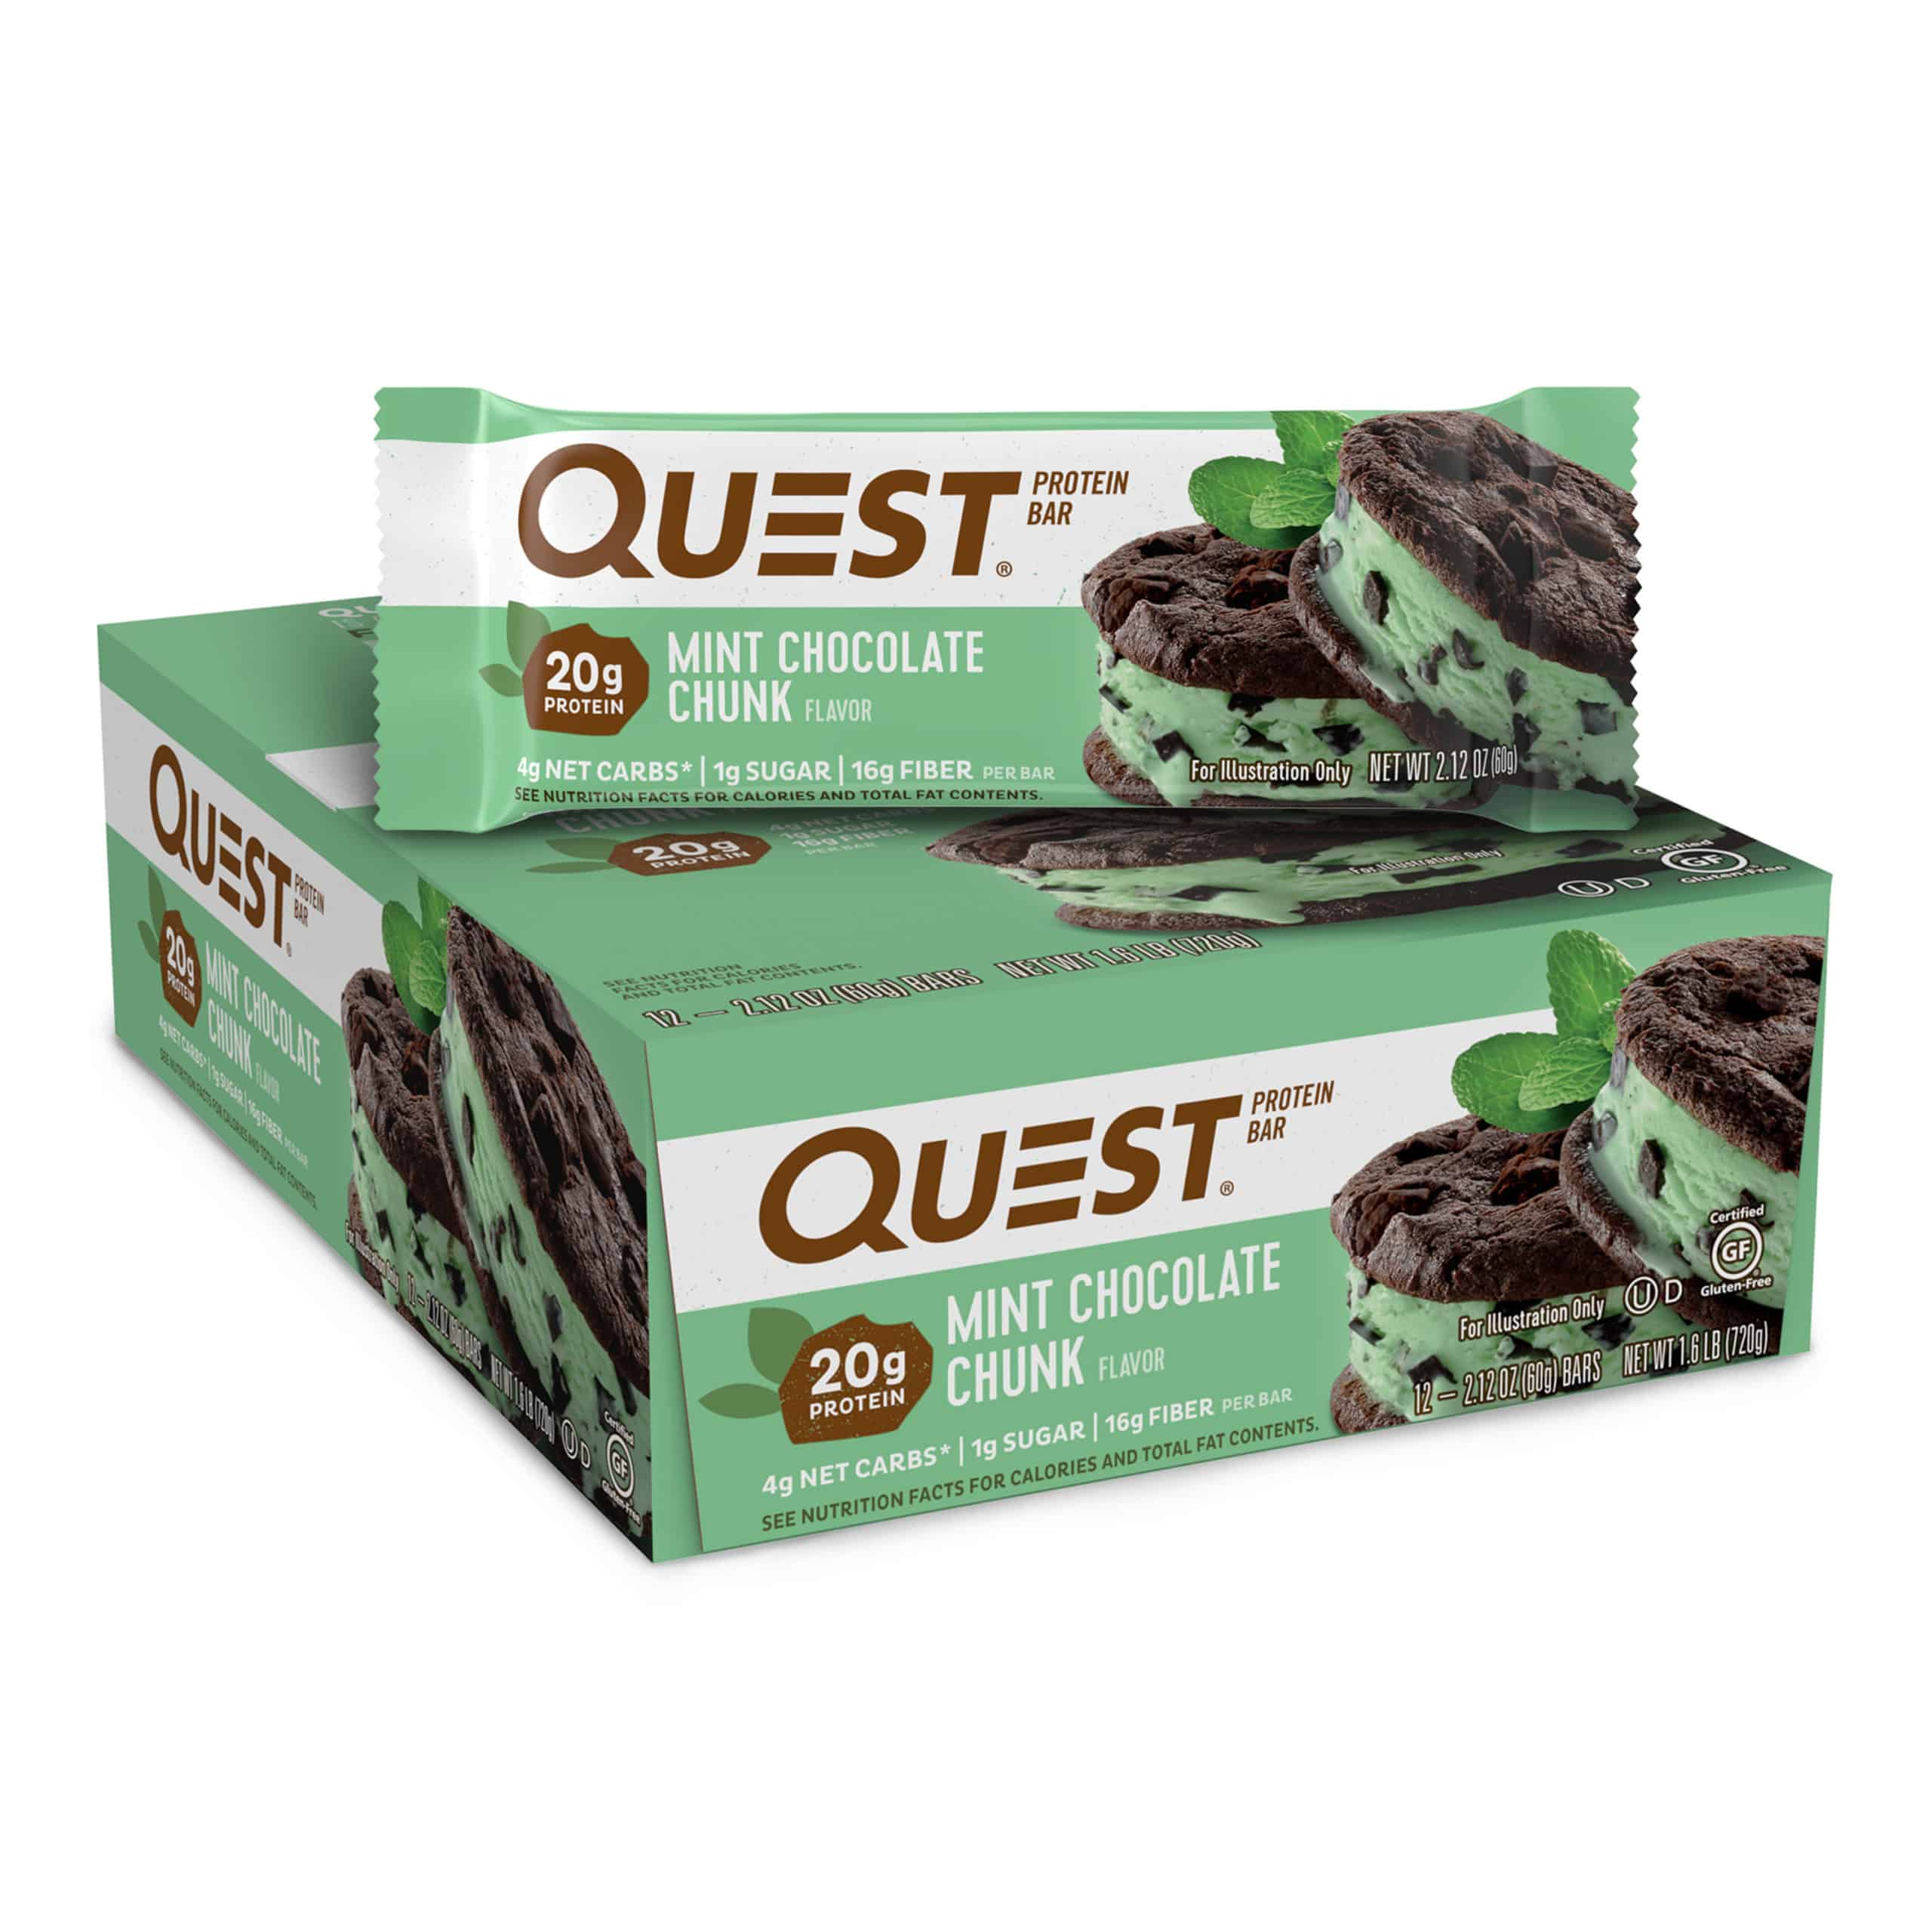 Quest Protein Bar, Mint Chocolate Chunk, 20g Protein, 12 Ct